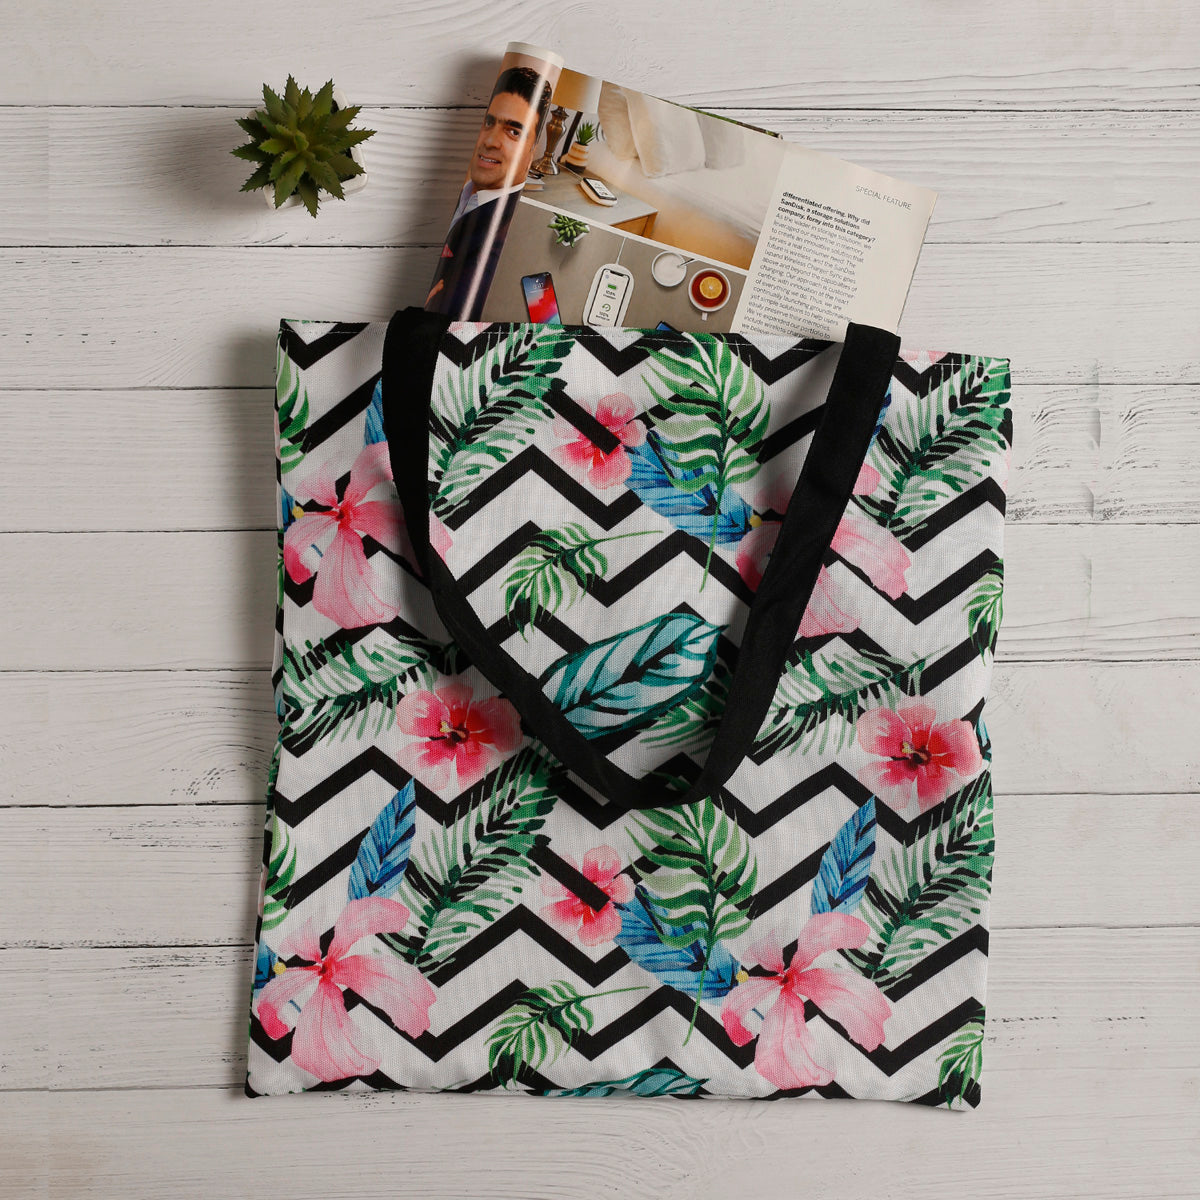 A stylish tote bag adorned with a tropical pattern and elegant black handles.